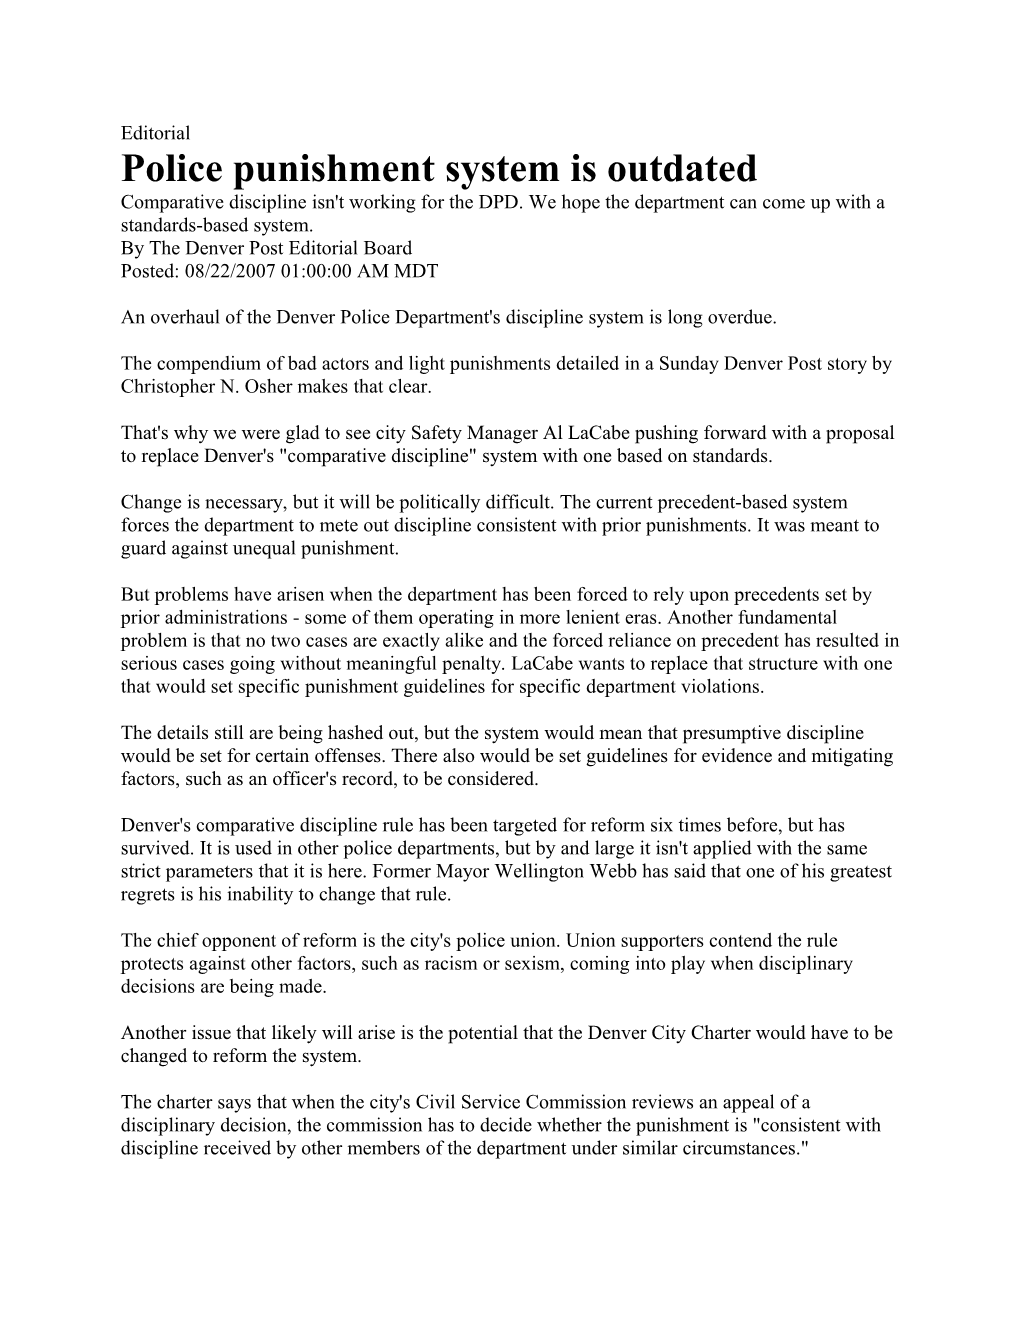 Police Punishment System Is Outdated